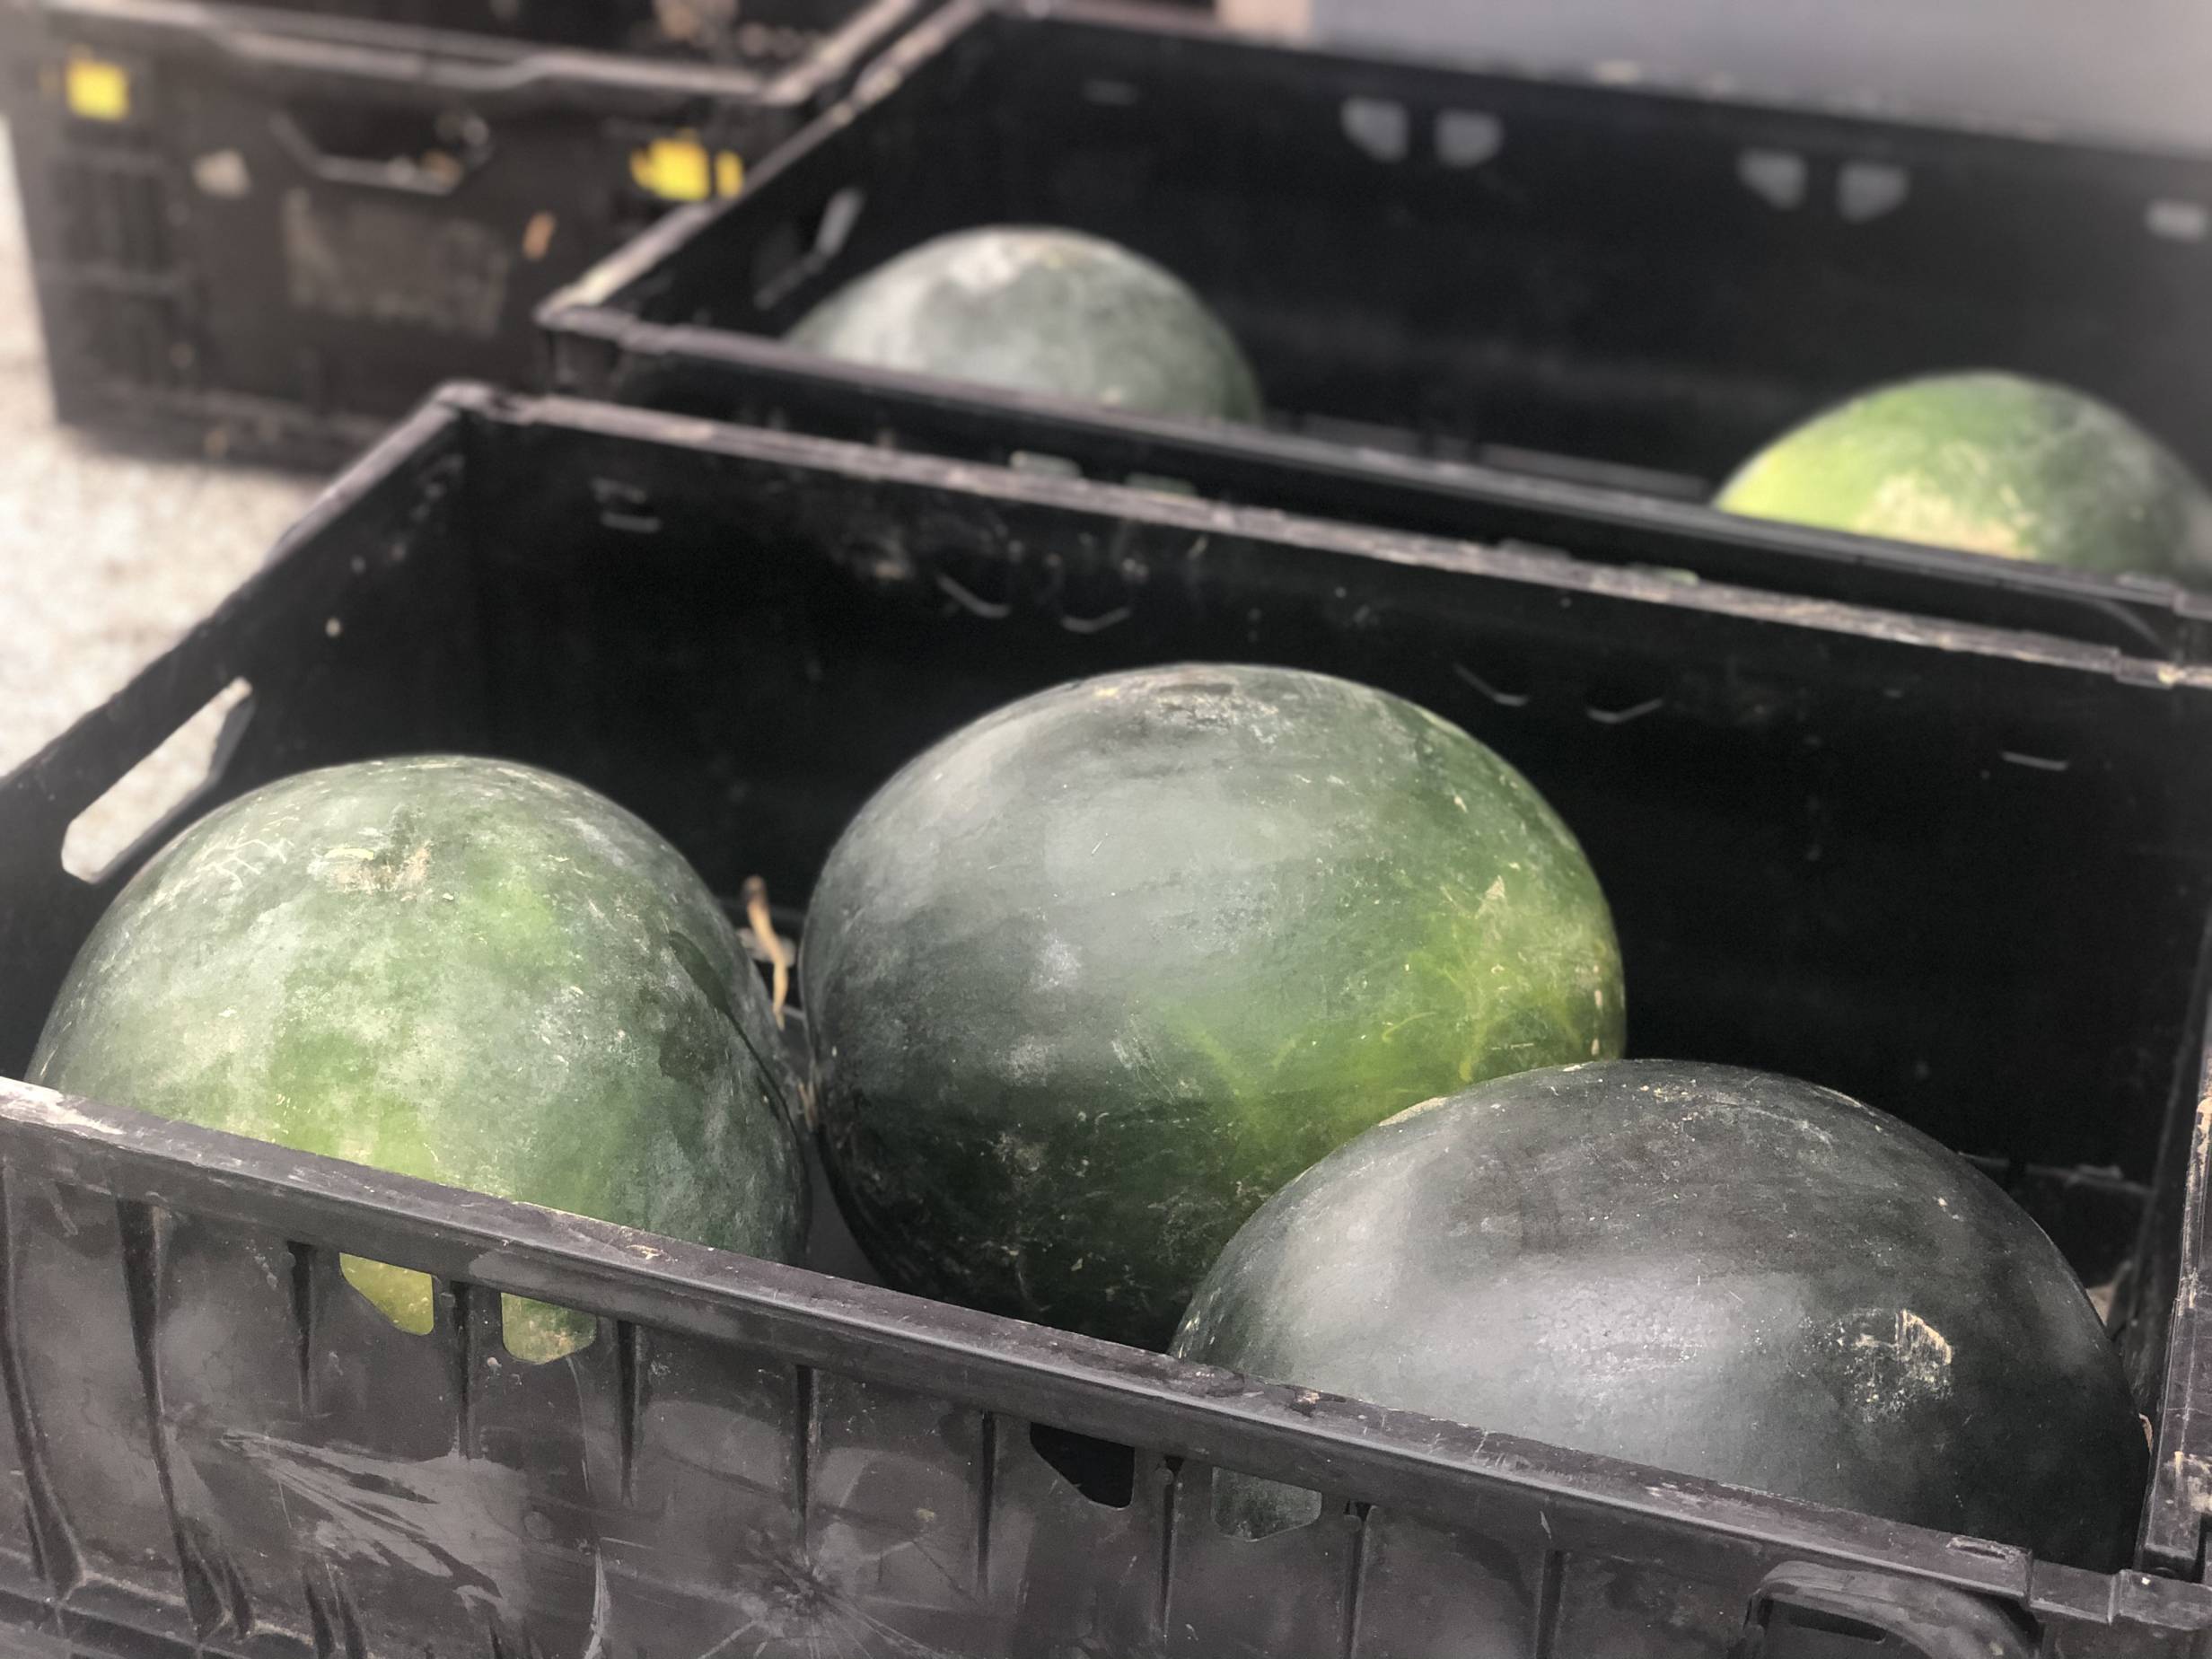 Three very round watermelons sit in a black tray at the Urbana Market in the Square. Photo by Alyssa Buckley.